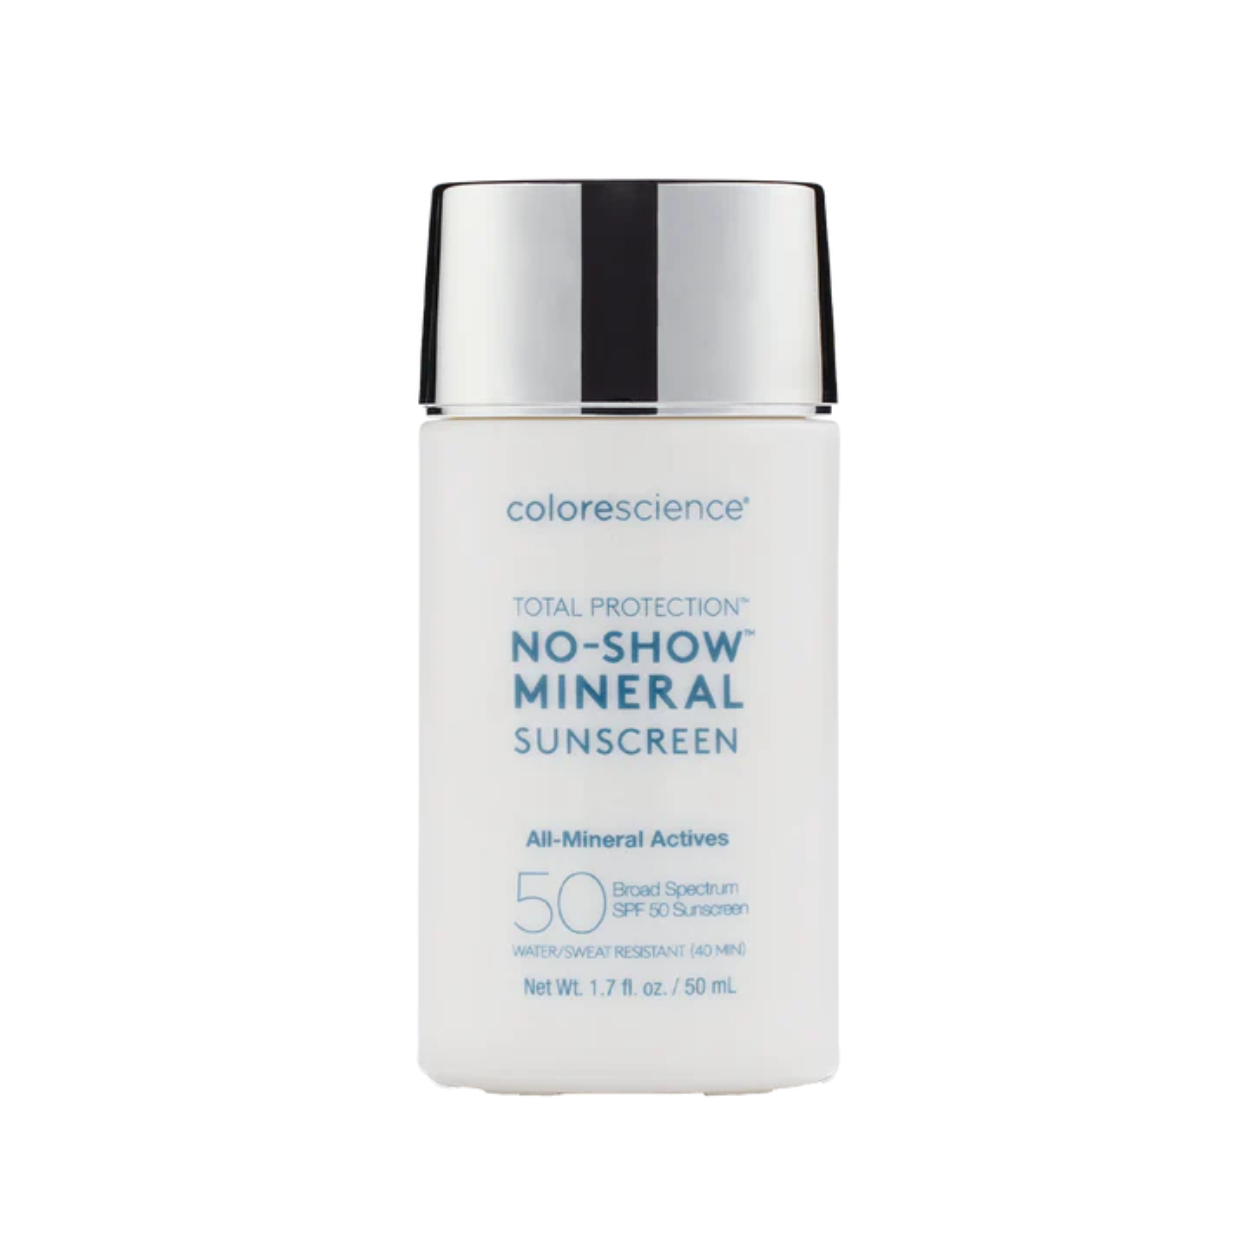 Total Protection No-Show Mineral Sunscreen SPF 50